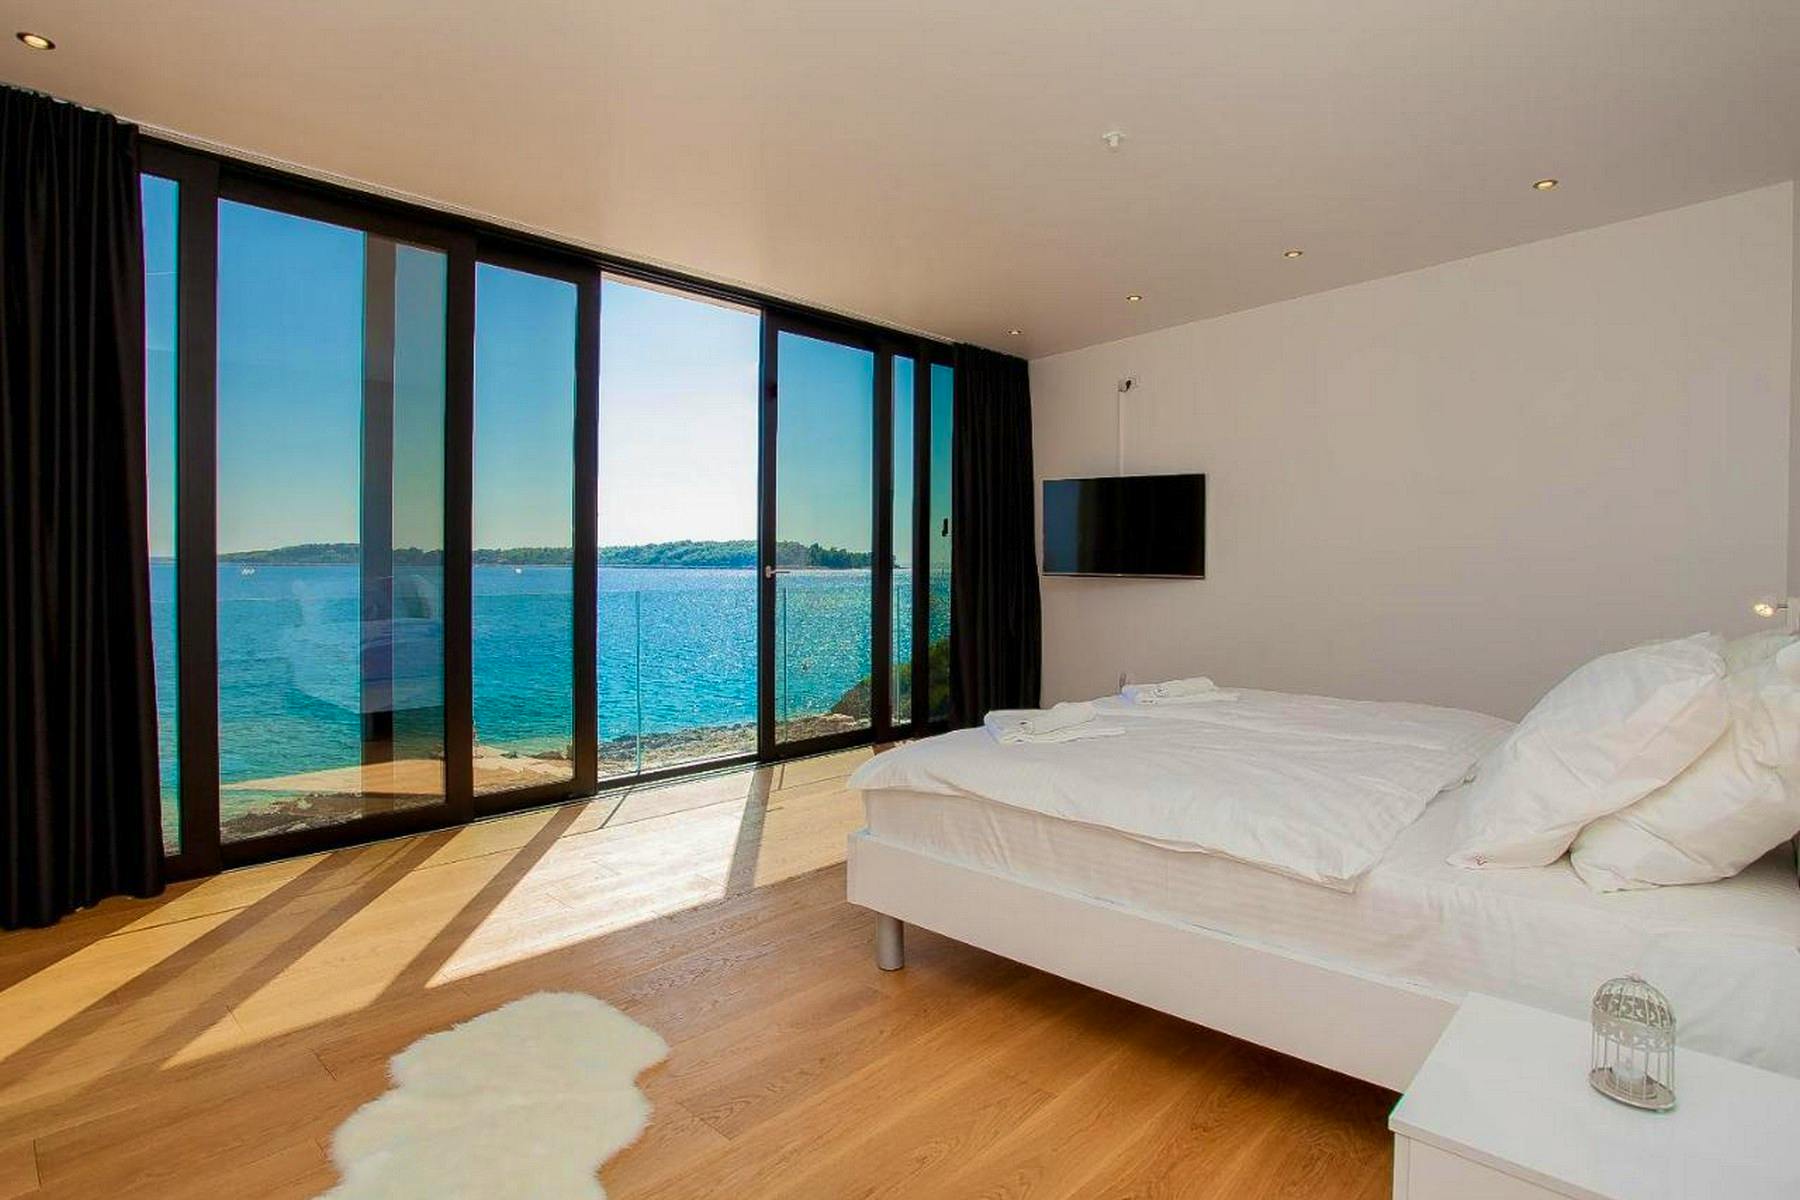 Stunning sea view from the bed